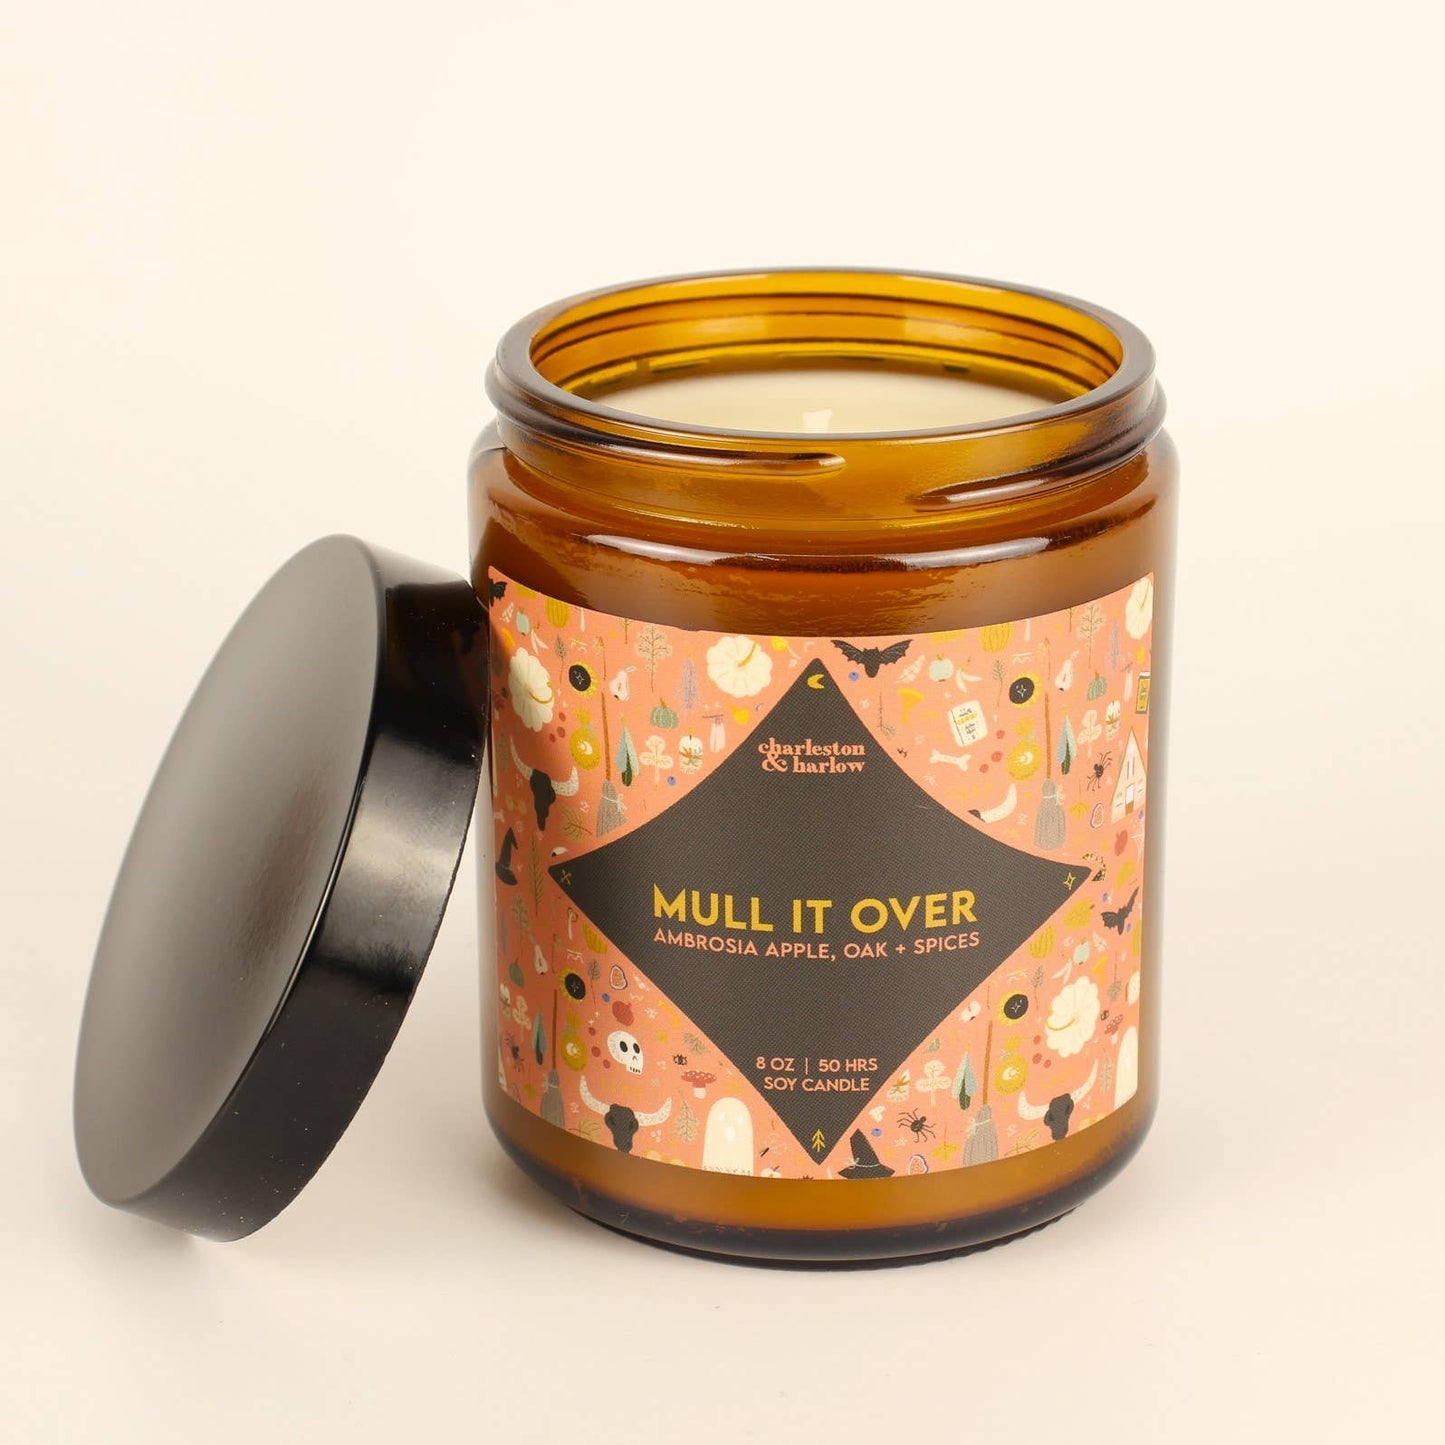 Charleston & Harlow Candle Co. - Mull It Over - Apple, Oak + Mulling Spices 8oz FALL Candle